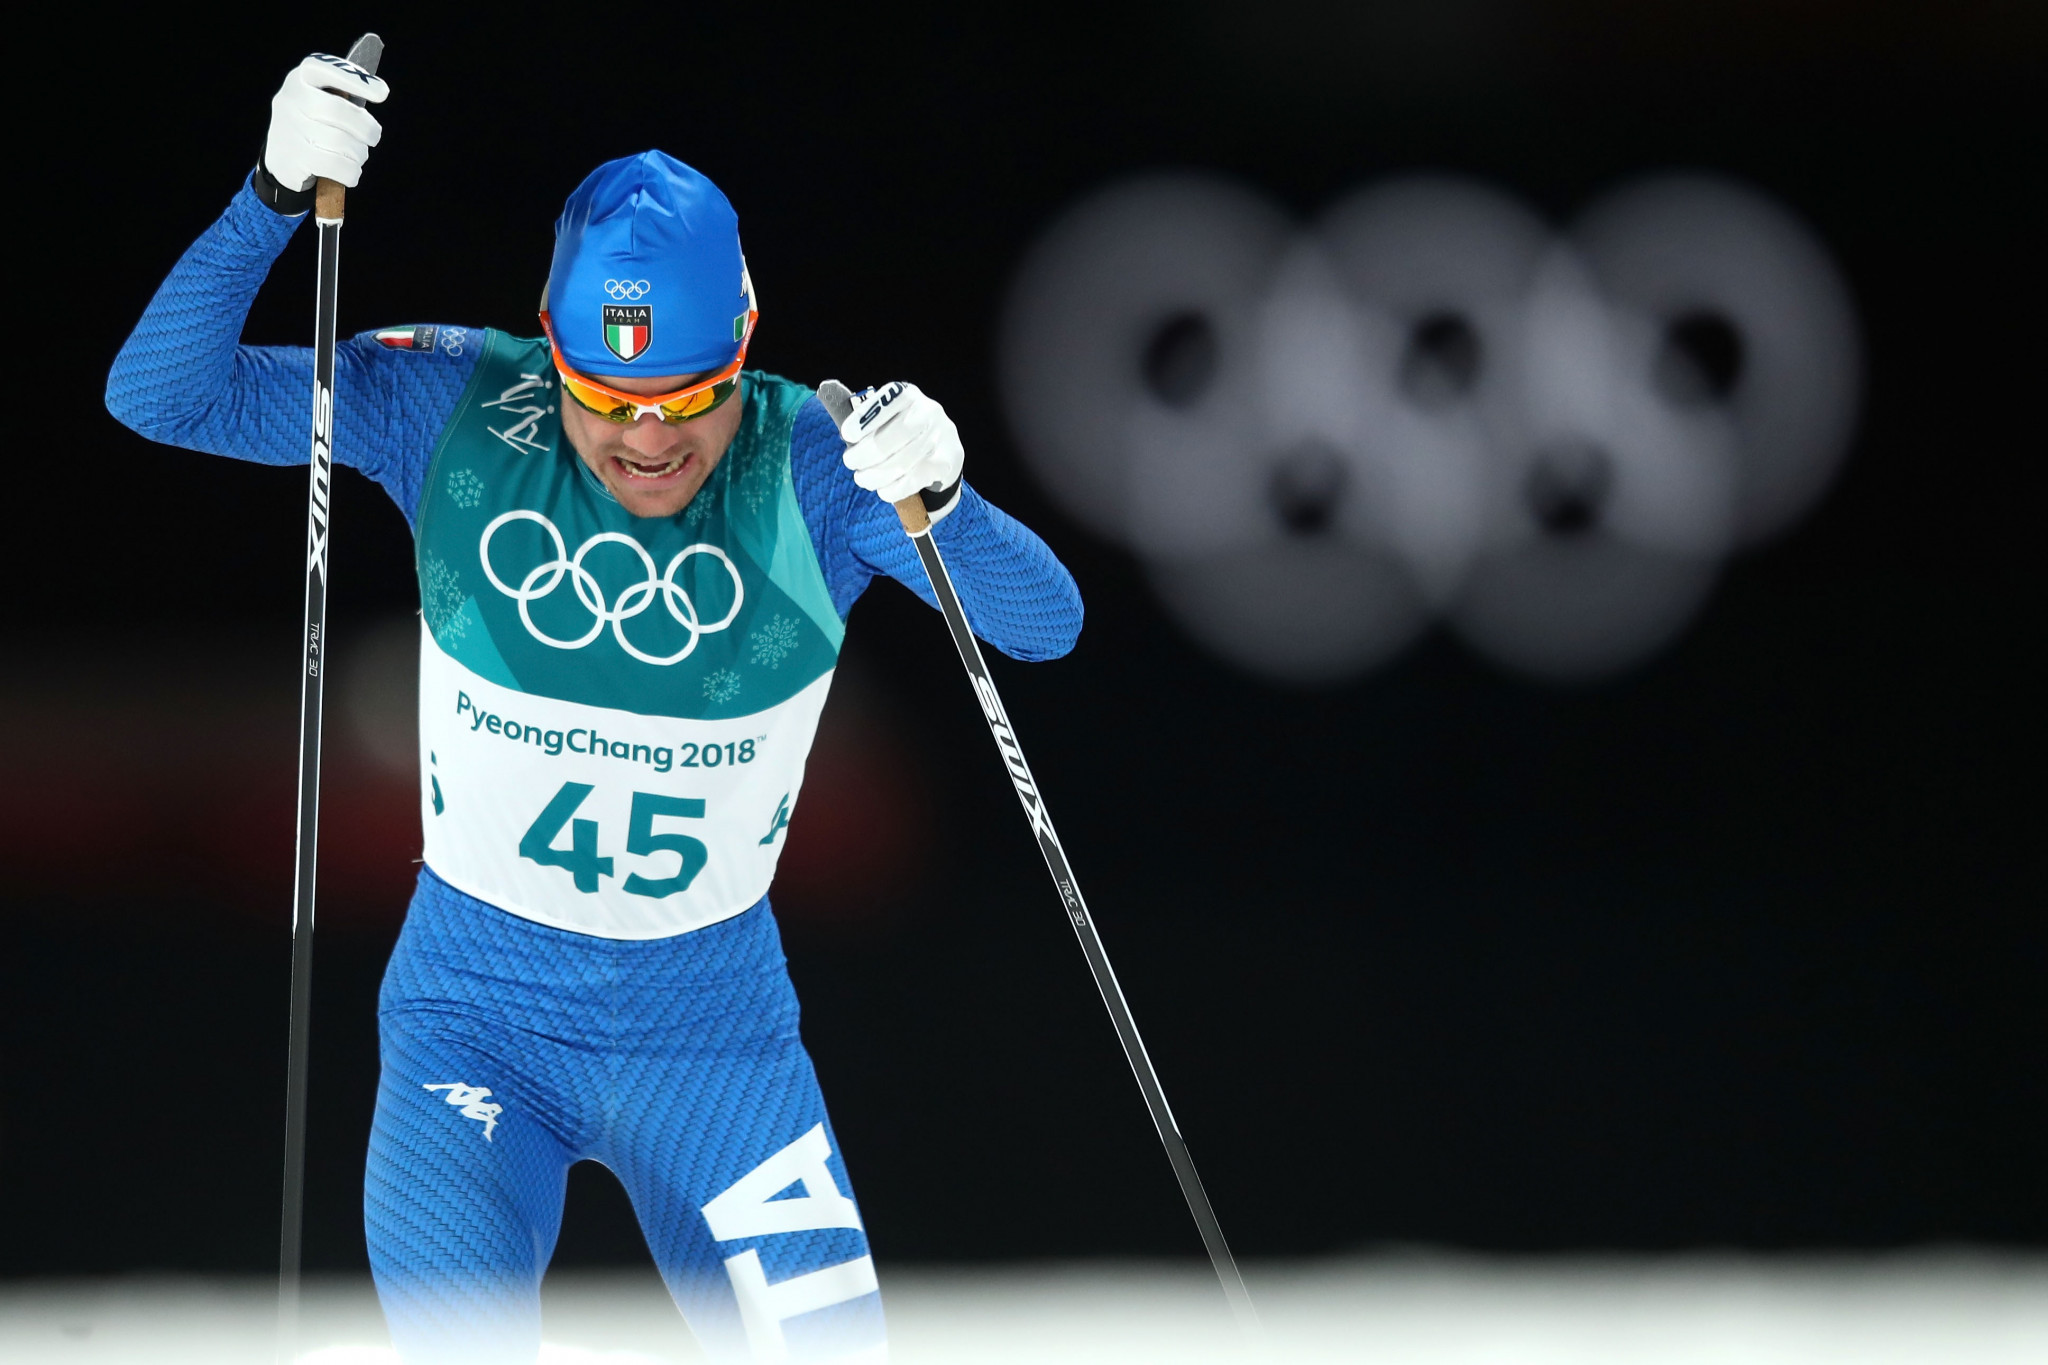 Triple Winter Olympian Runggaldier announces Nordic combined retirement